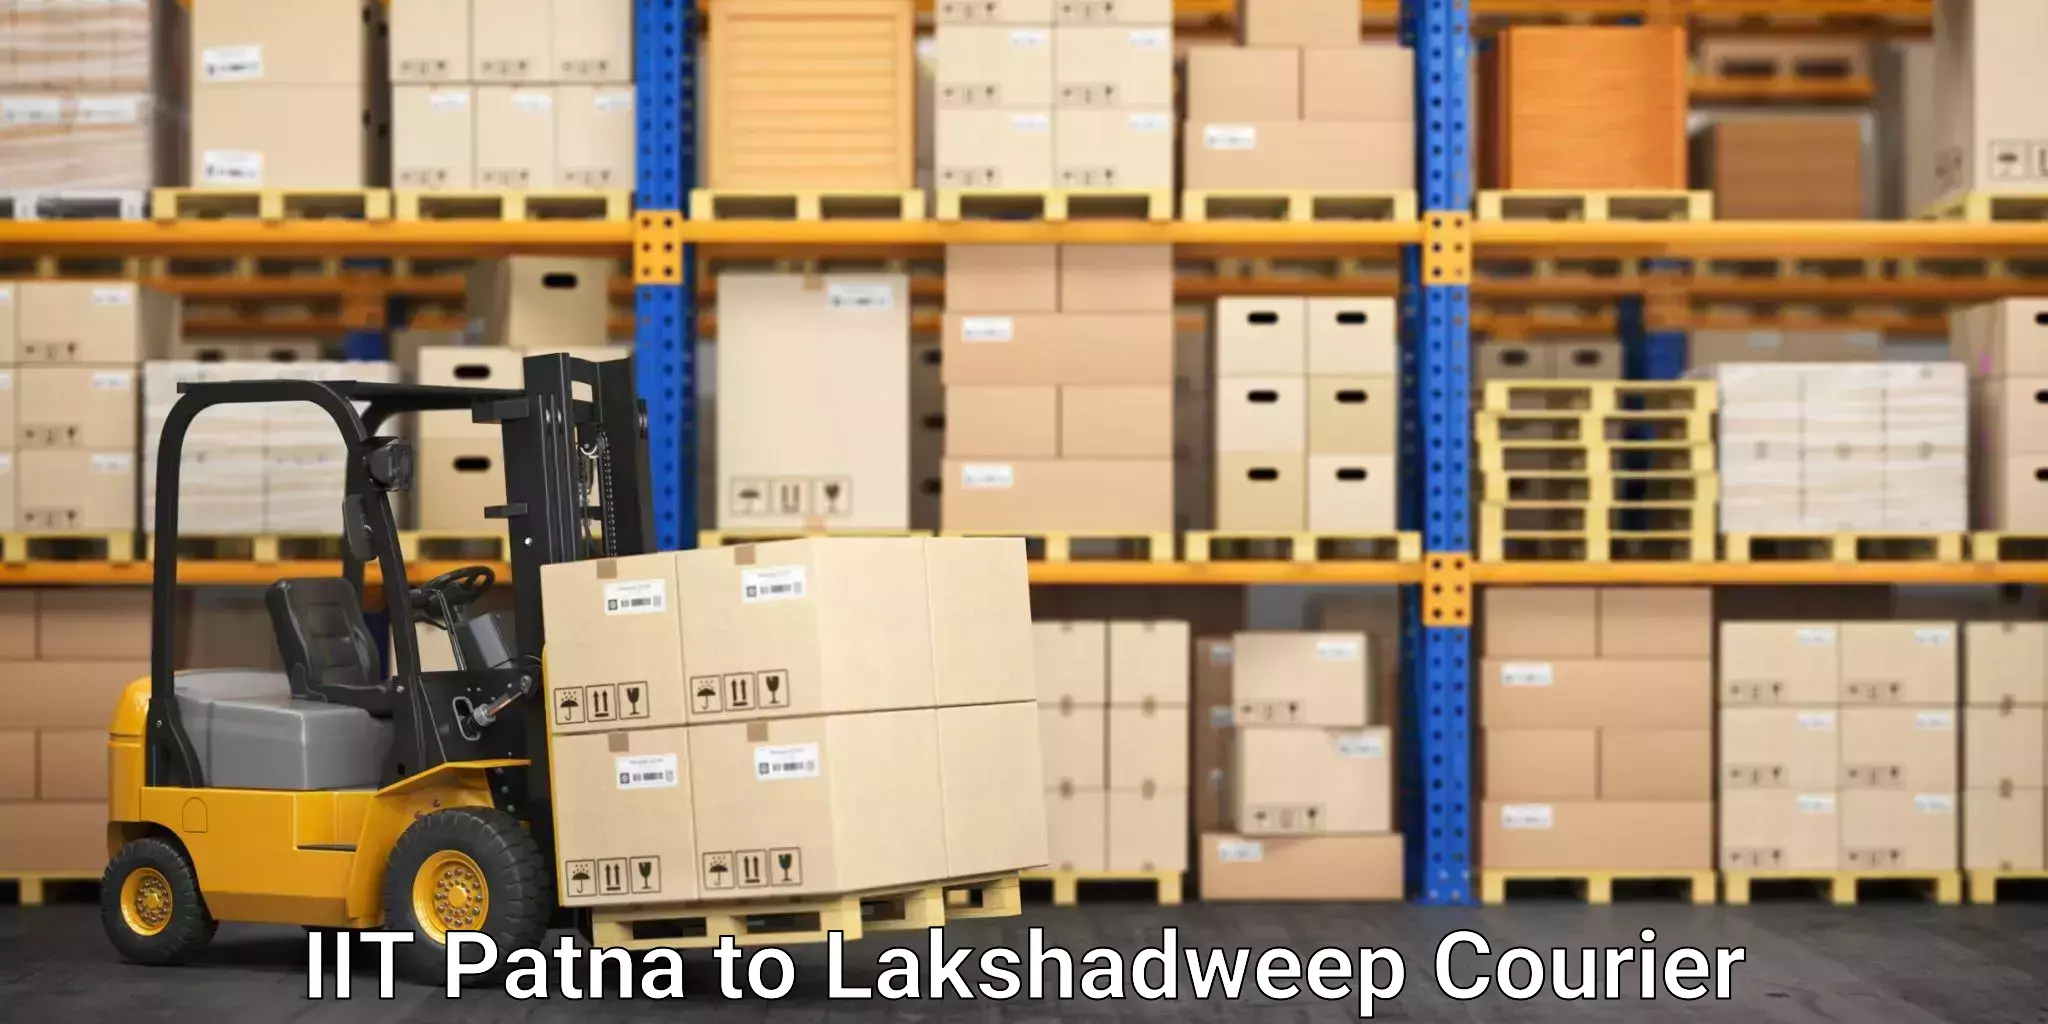 Furniture moving specialists IIT Patna to Lakshadweep